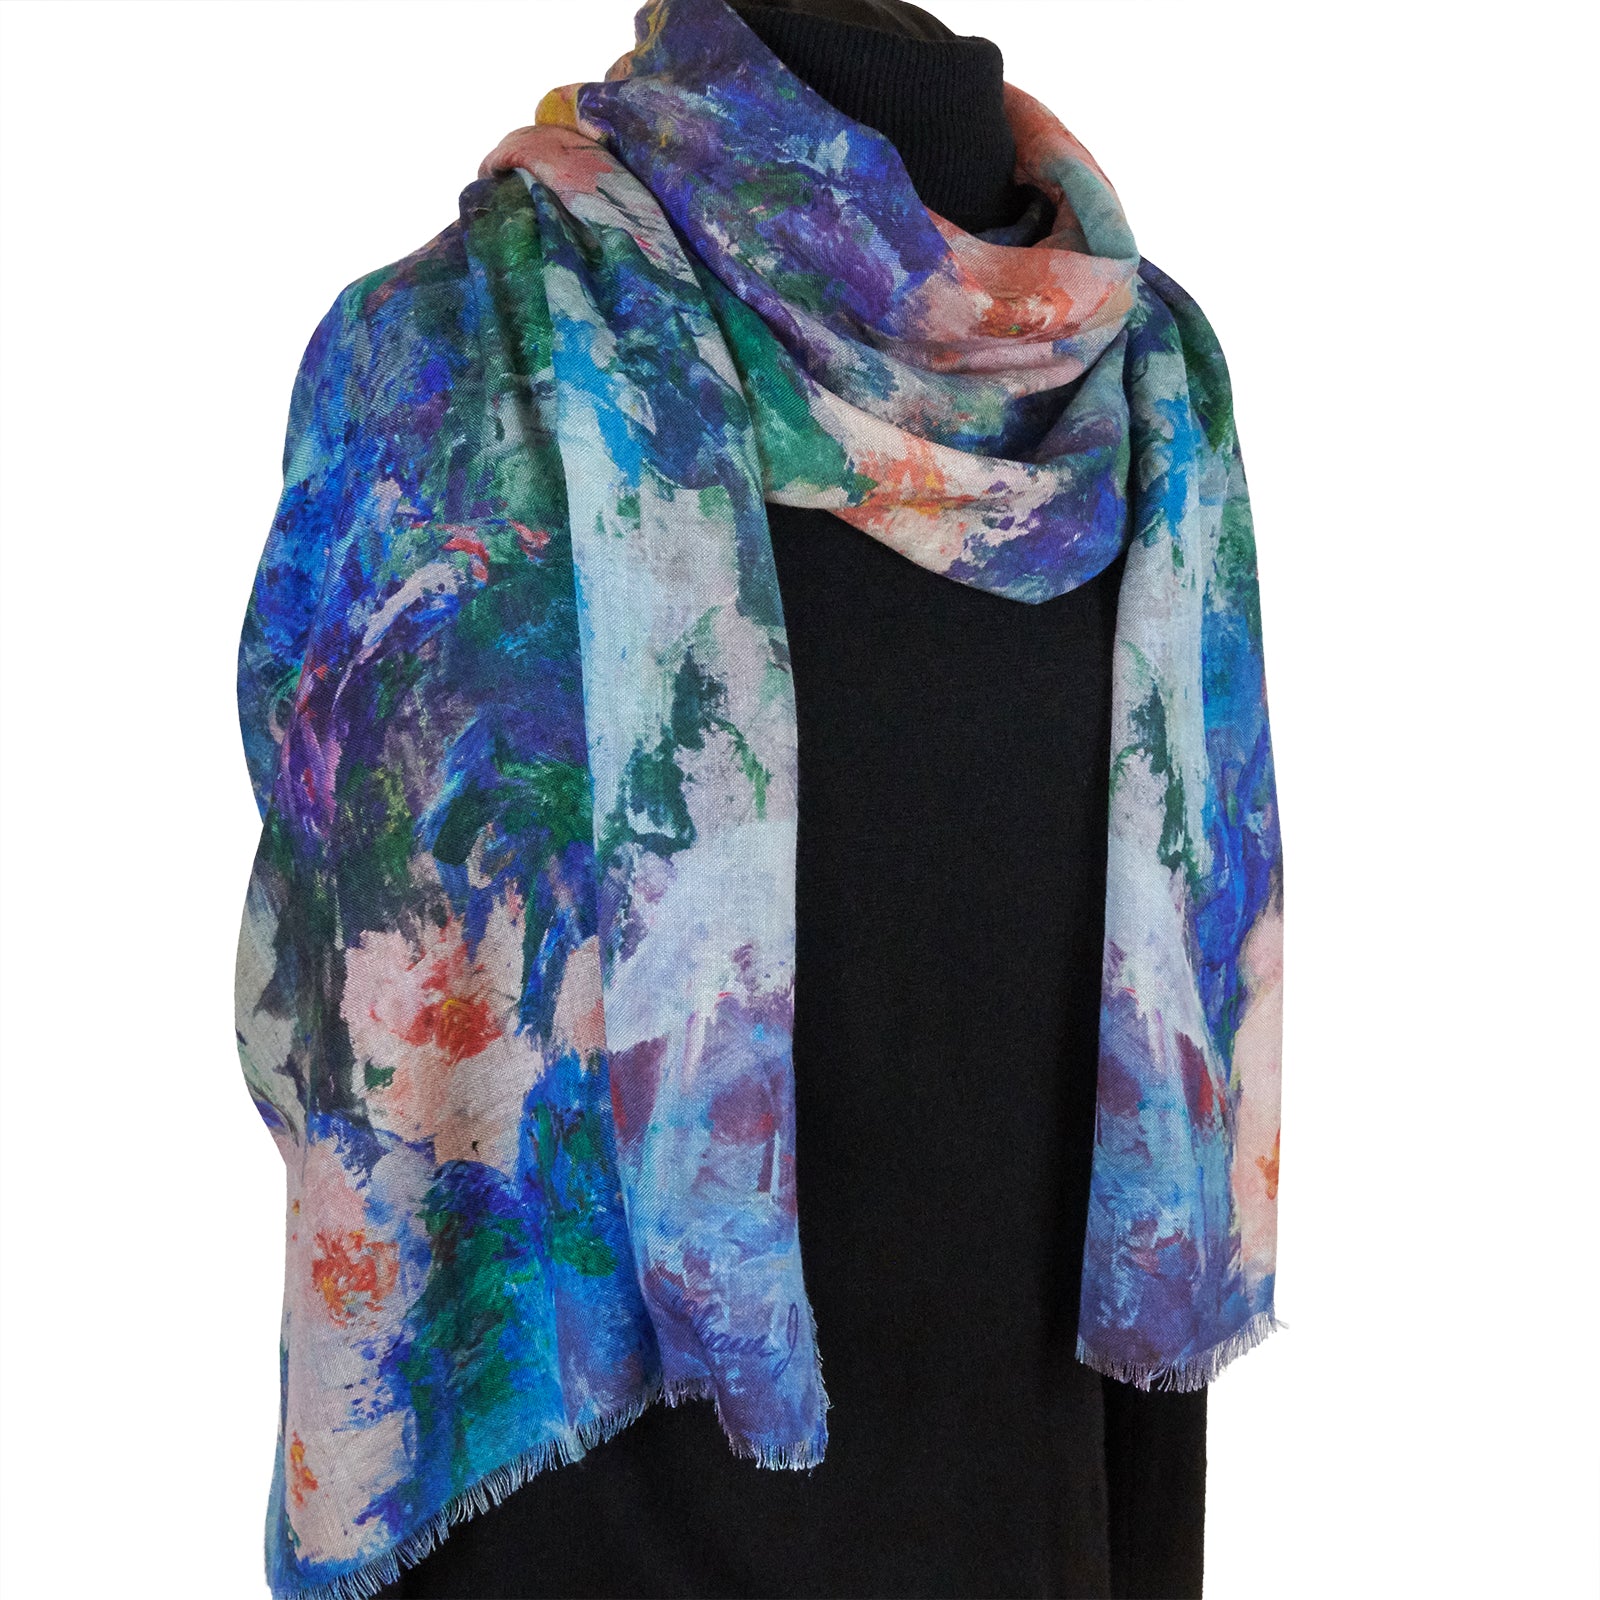 Long cashmere-silk scarf with floral design by Oksana Fine Art and Design, based on an original impressionist painting of pink orchids with a light green and blue background, worn over a black sweater, 210x70 cm, 82x27 inches